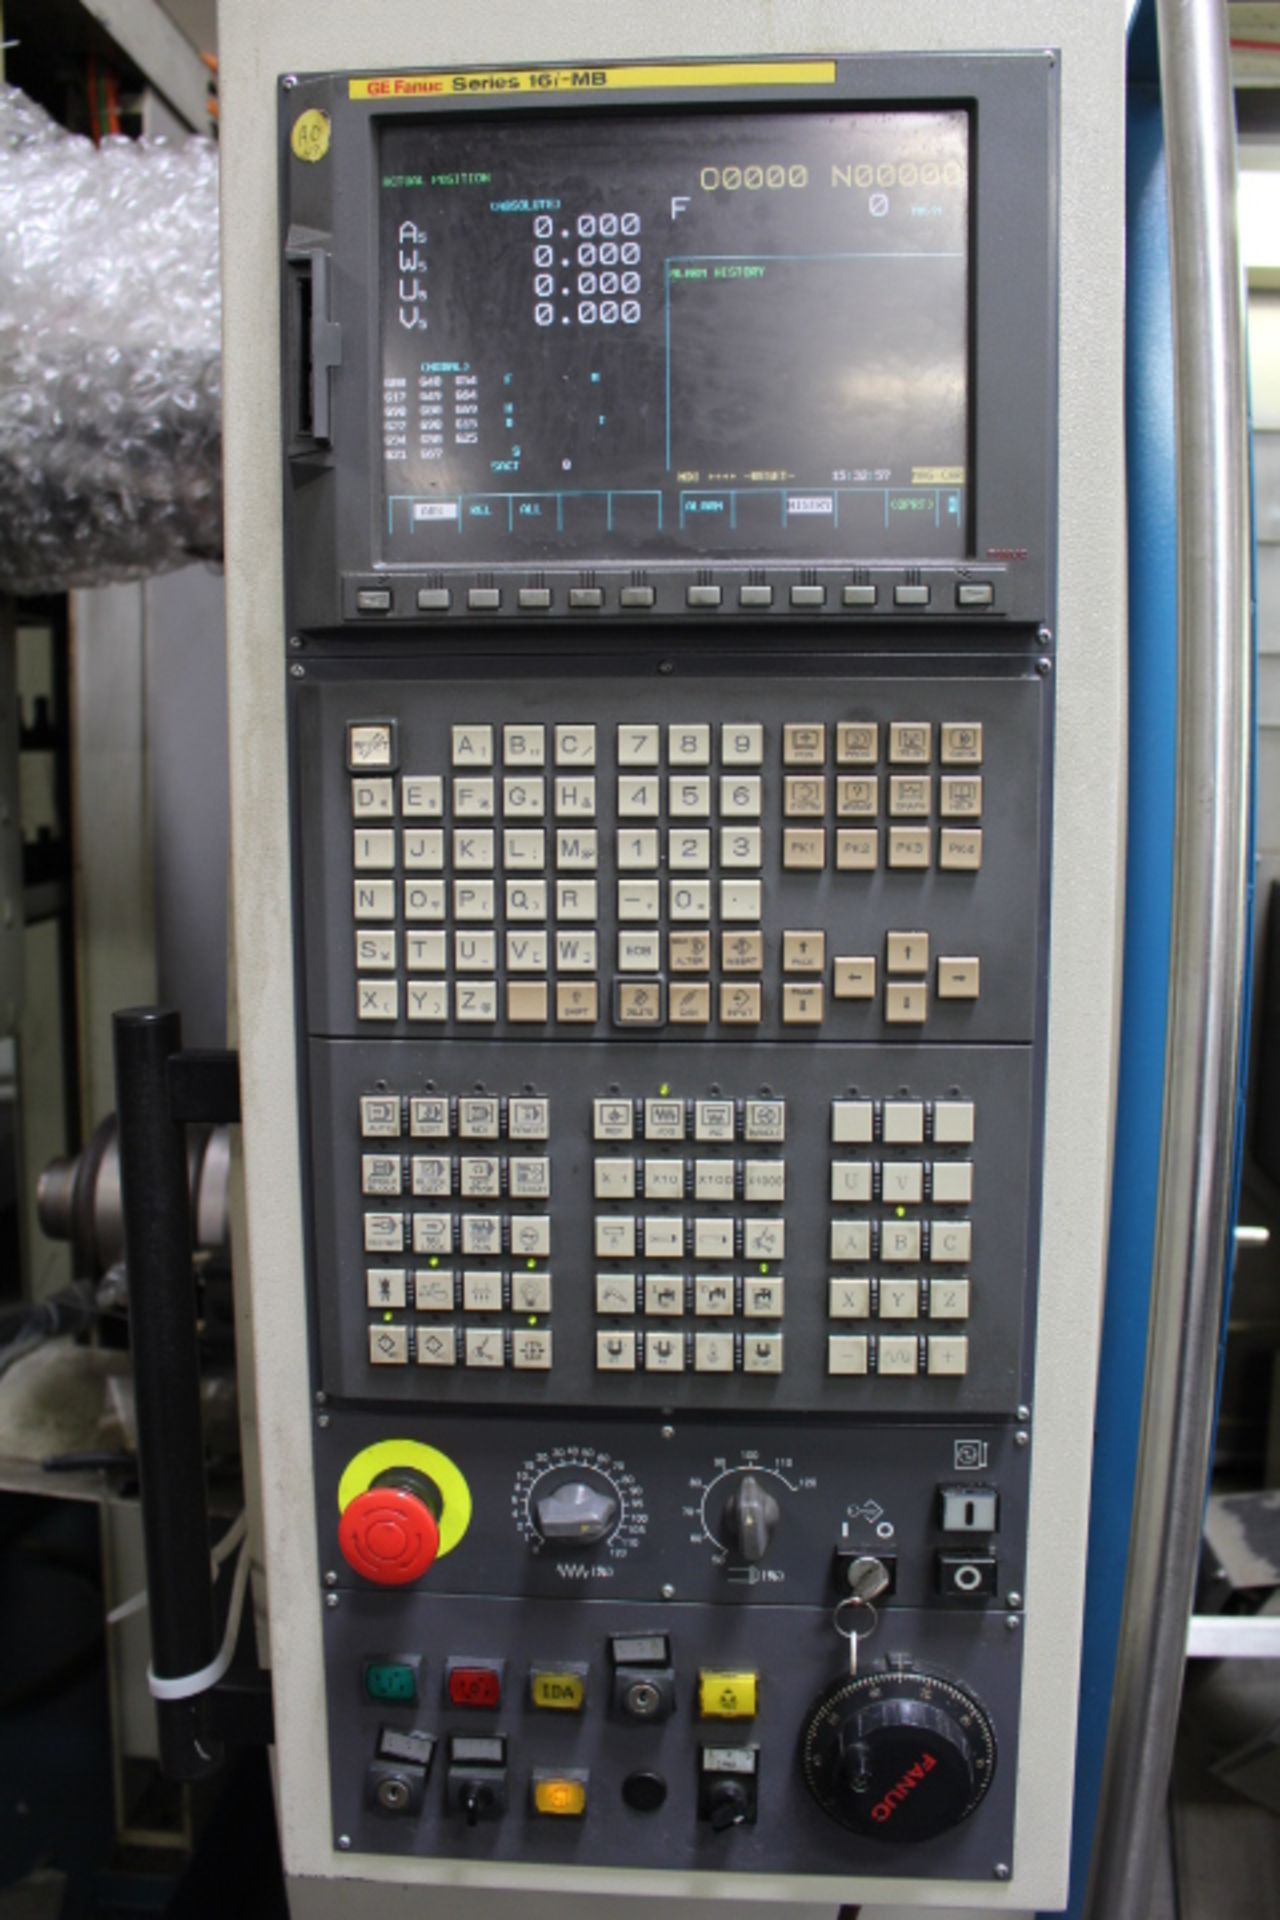 2007 WILLEMIN CNC MILL/TURNING LATHE, MODEL 518MT 7-AXIS, GE SERIES FANUC 16i-MB CNC CONTROL, 72 ATC - Image 4 of 38